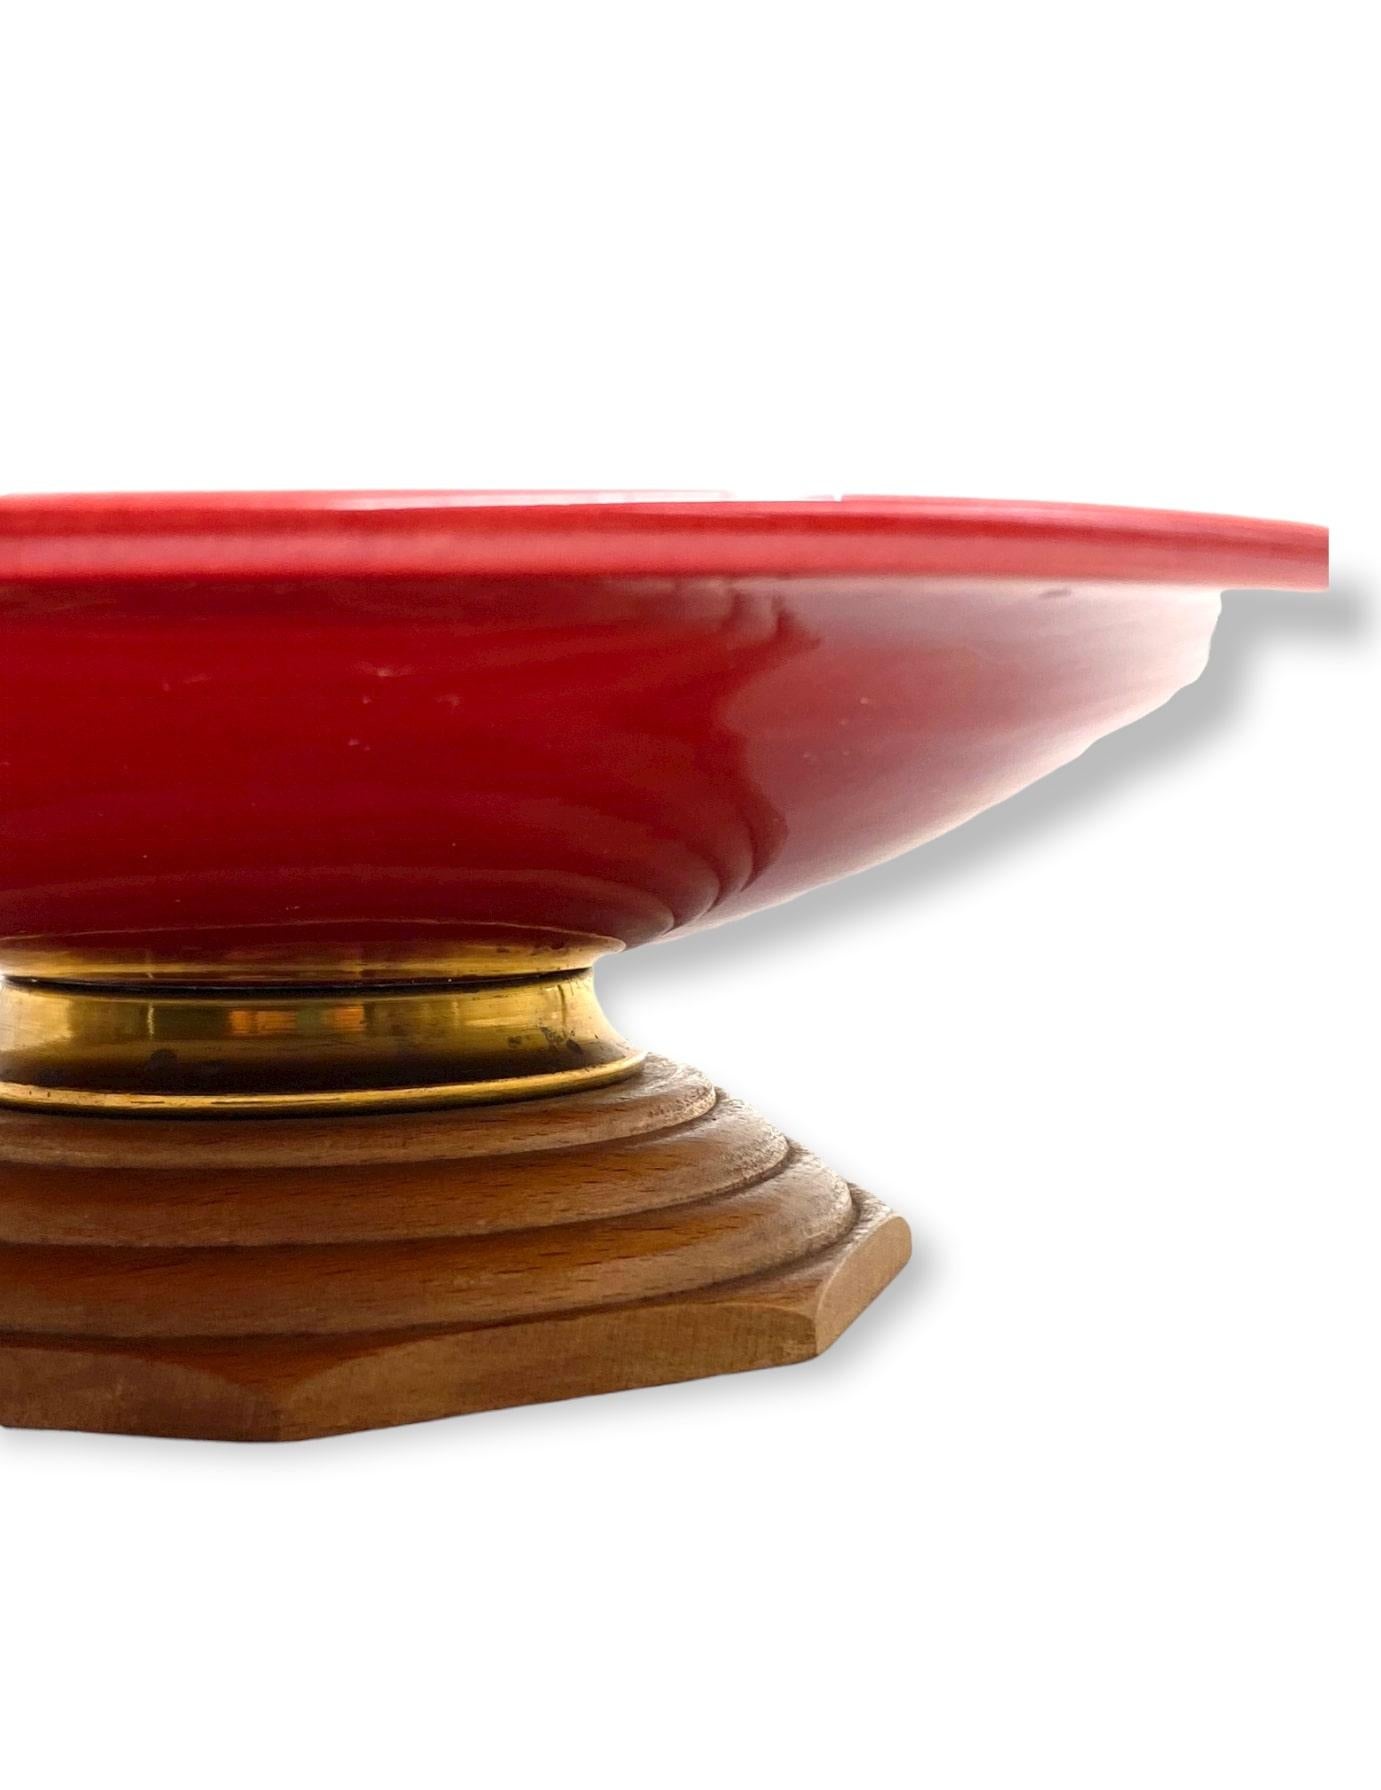 Mid-20th Century Modern Red Vide Poche / Centerpiece, Sevres, France, 1940s For Sale